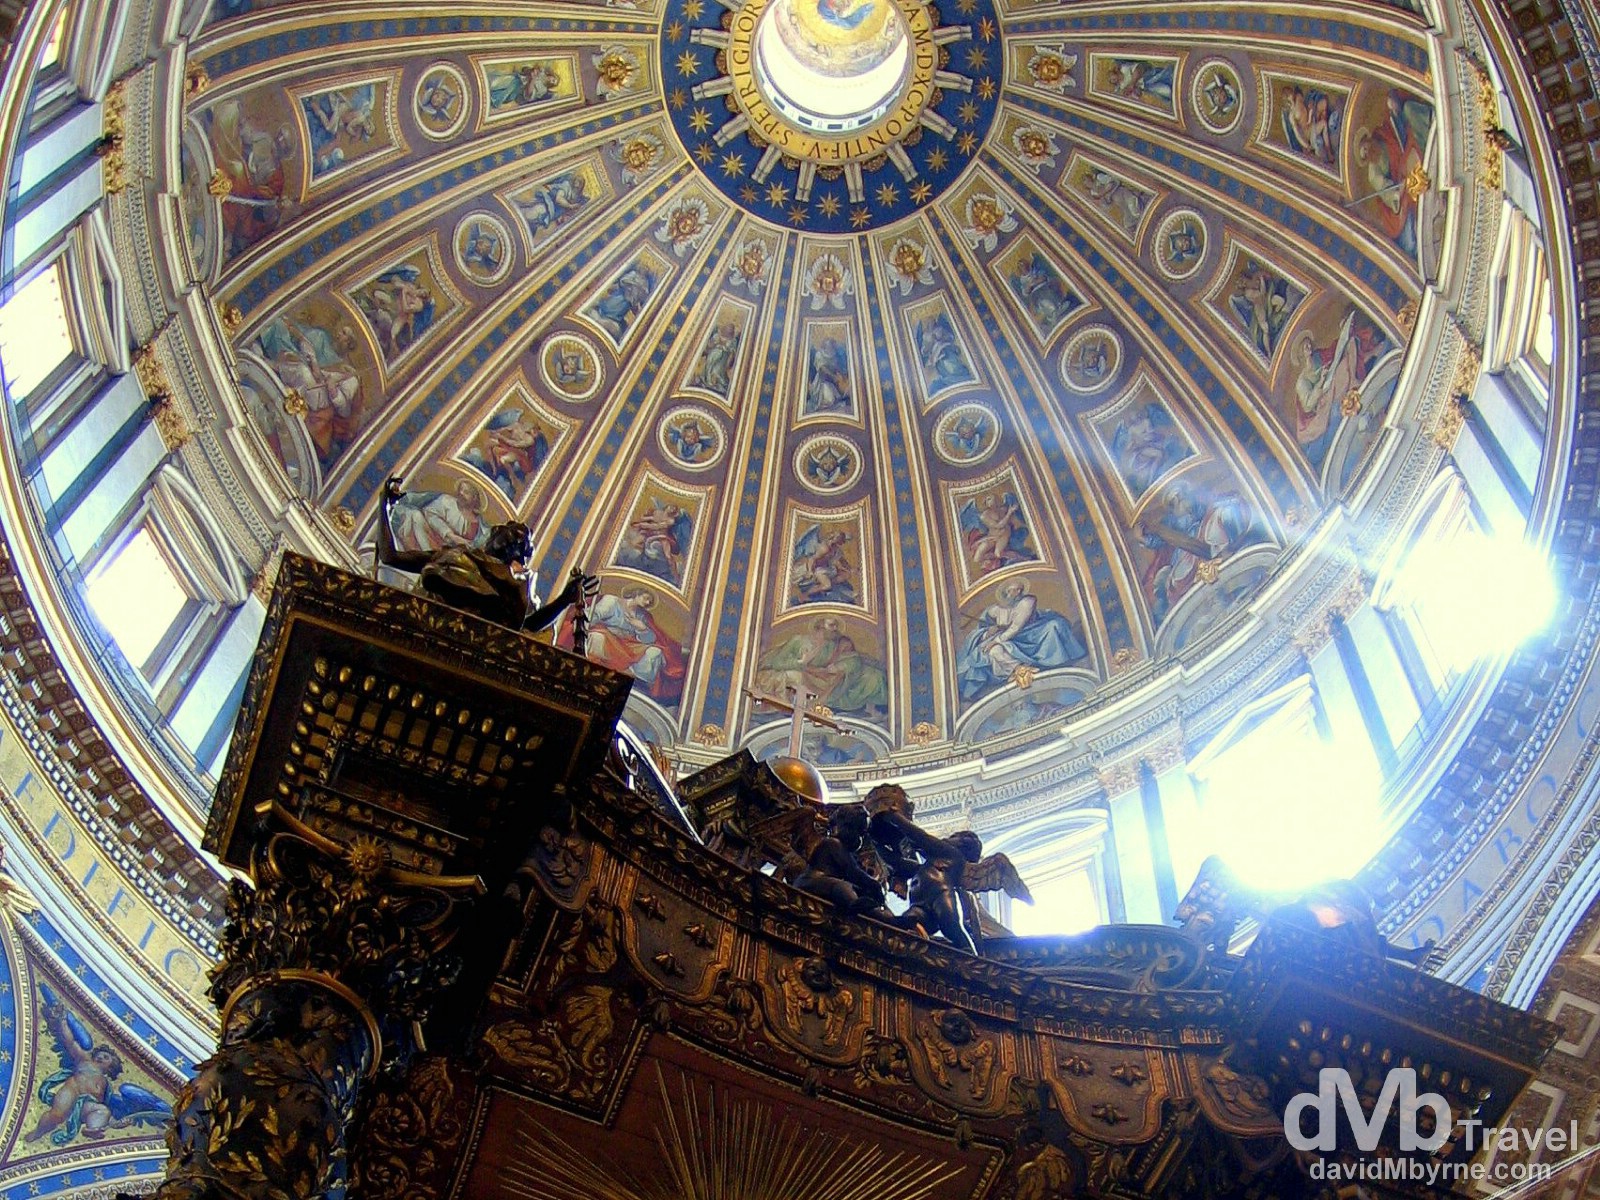 The dome of St. Peter. St. Peter's Basilica, Vatican City. September 1st, 2007.